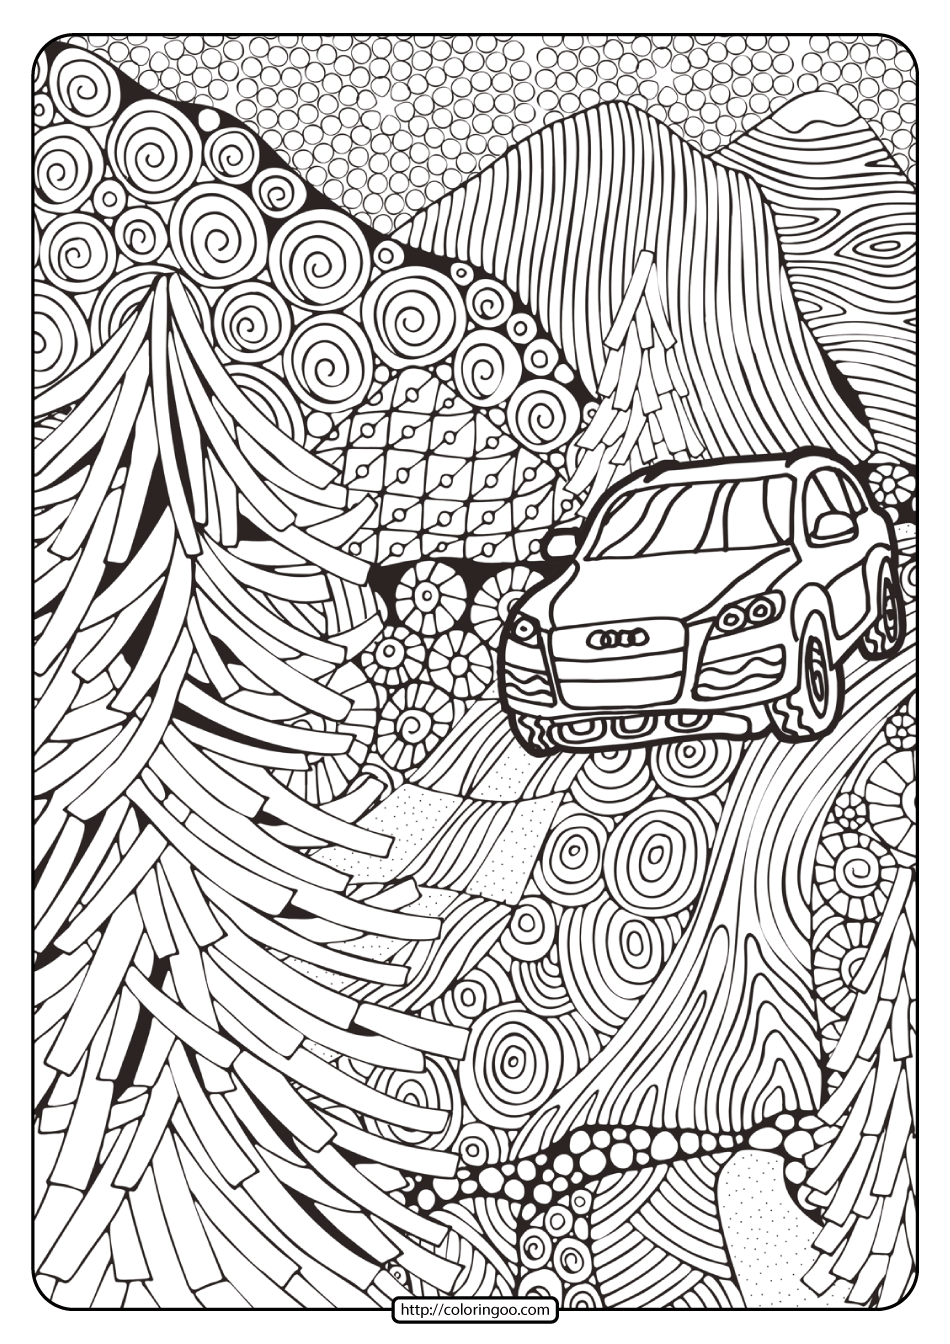 Printable Audi Cars Coloring Book & Page - 02